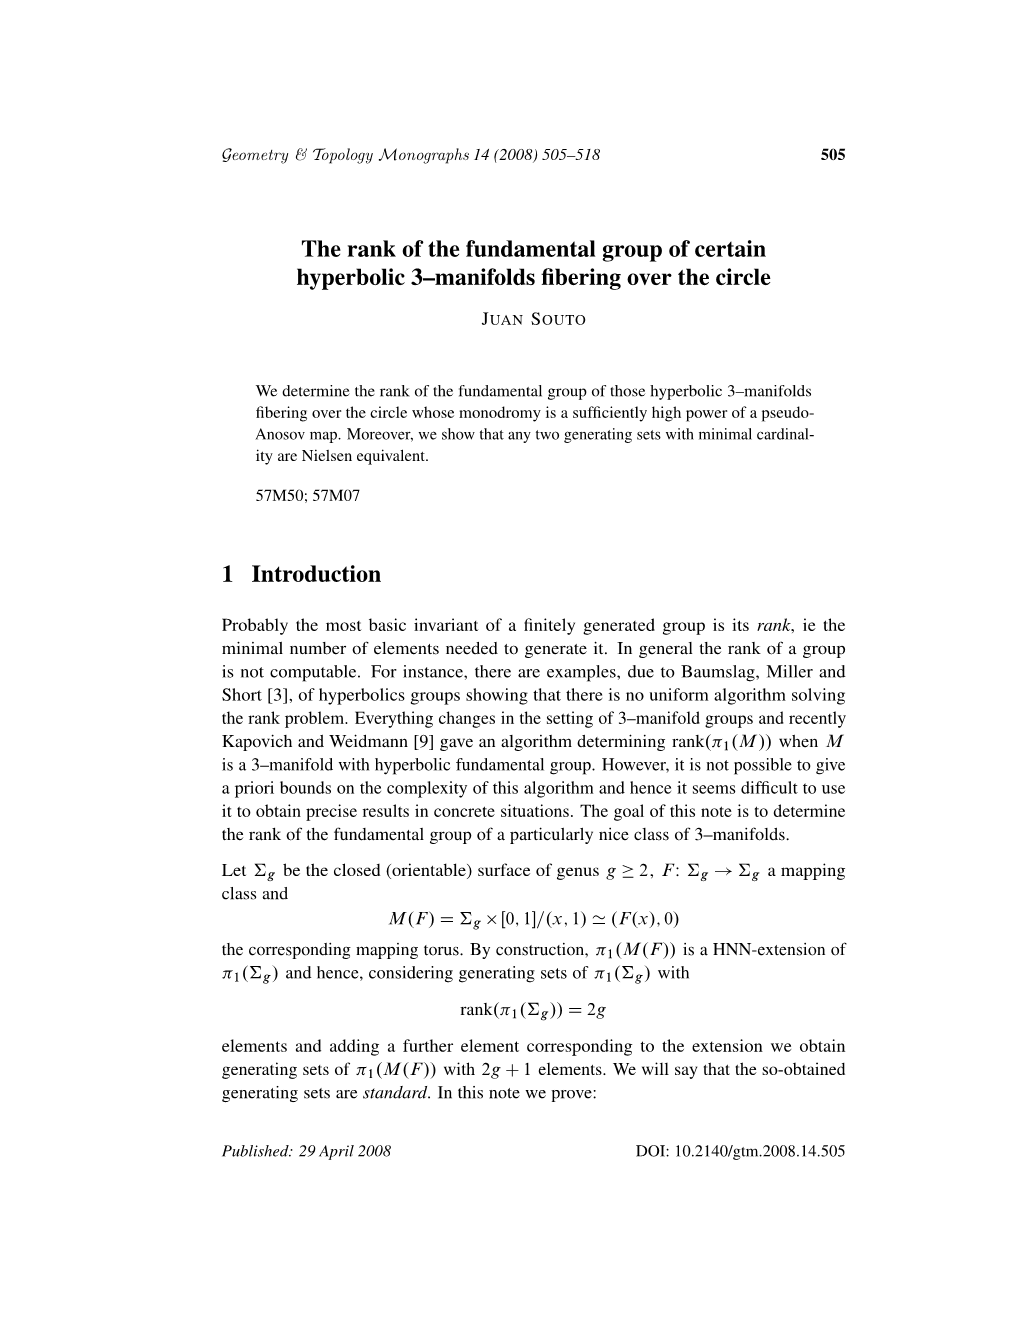 The Rank of the Fundamental Group of Certain Hyperbolic 3--Manifolds